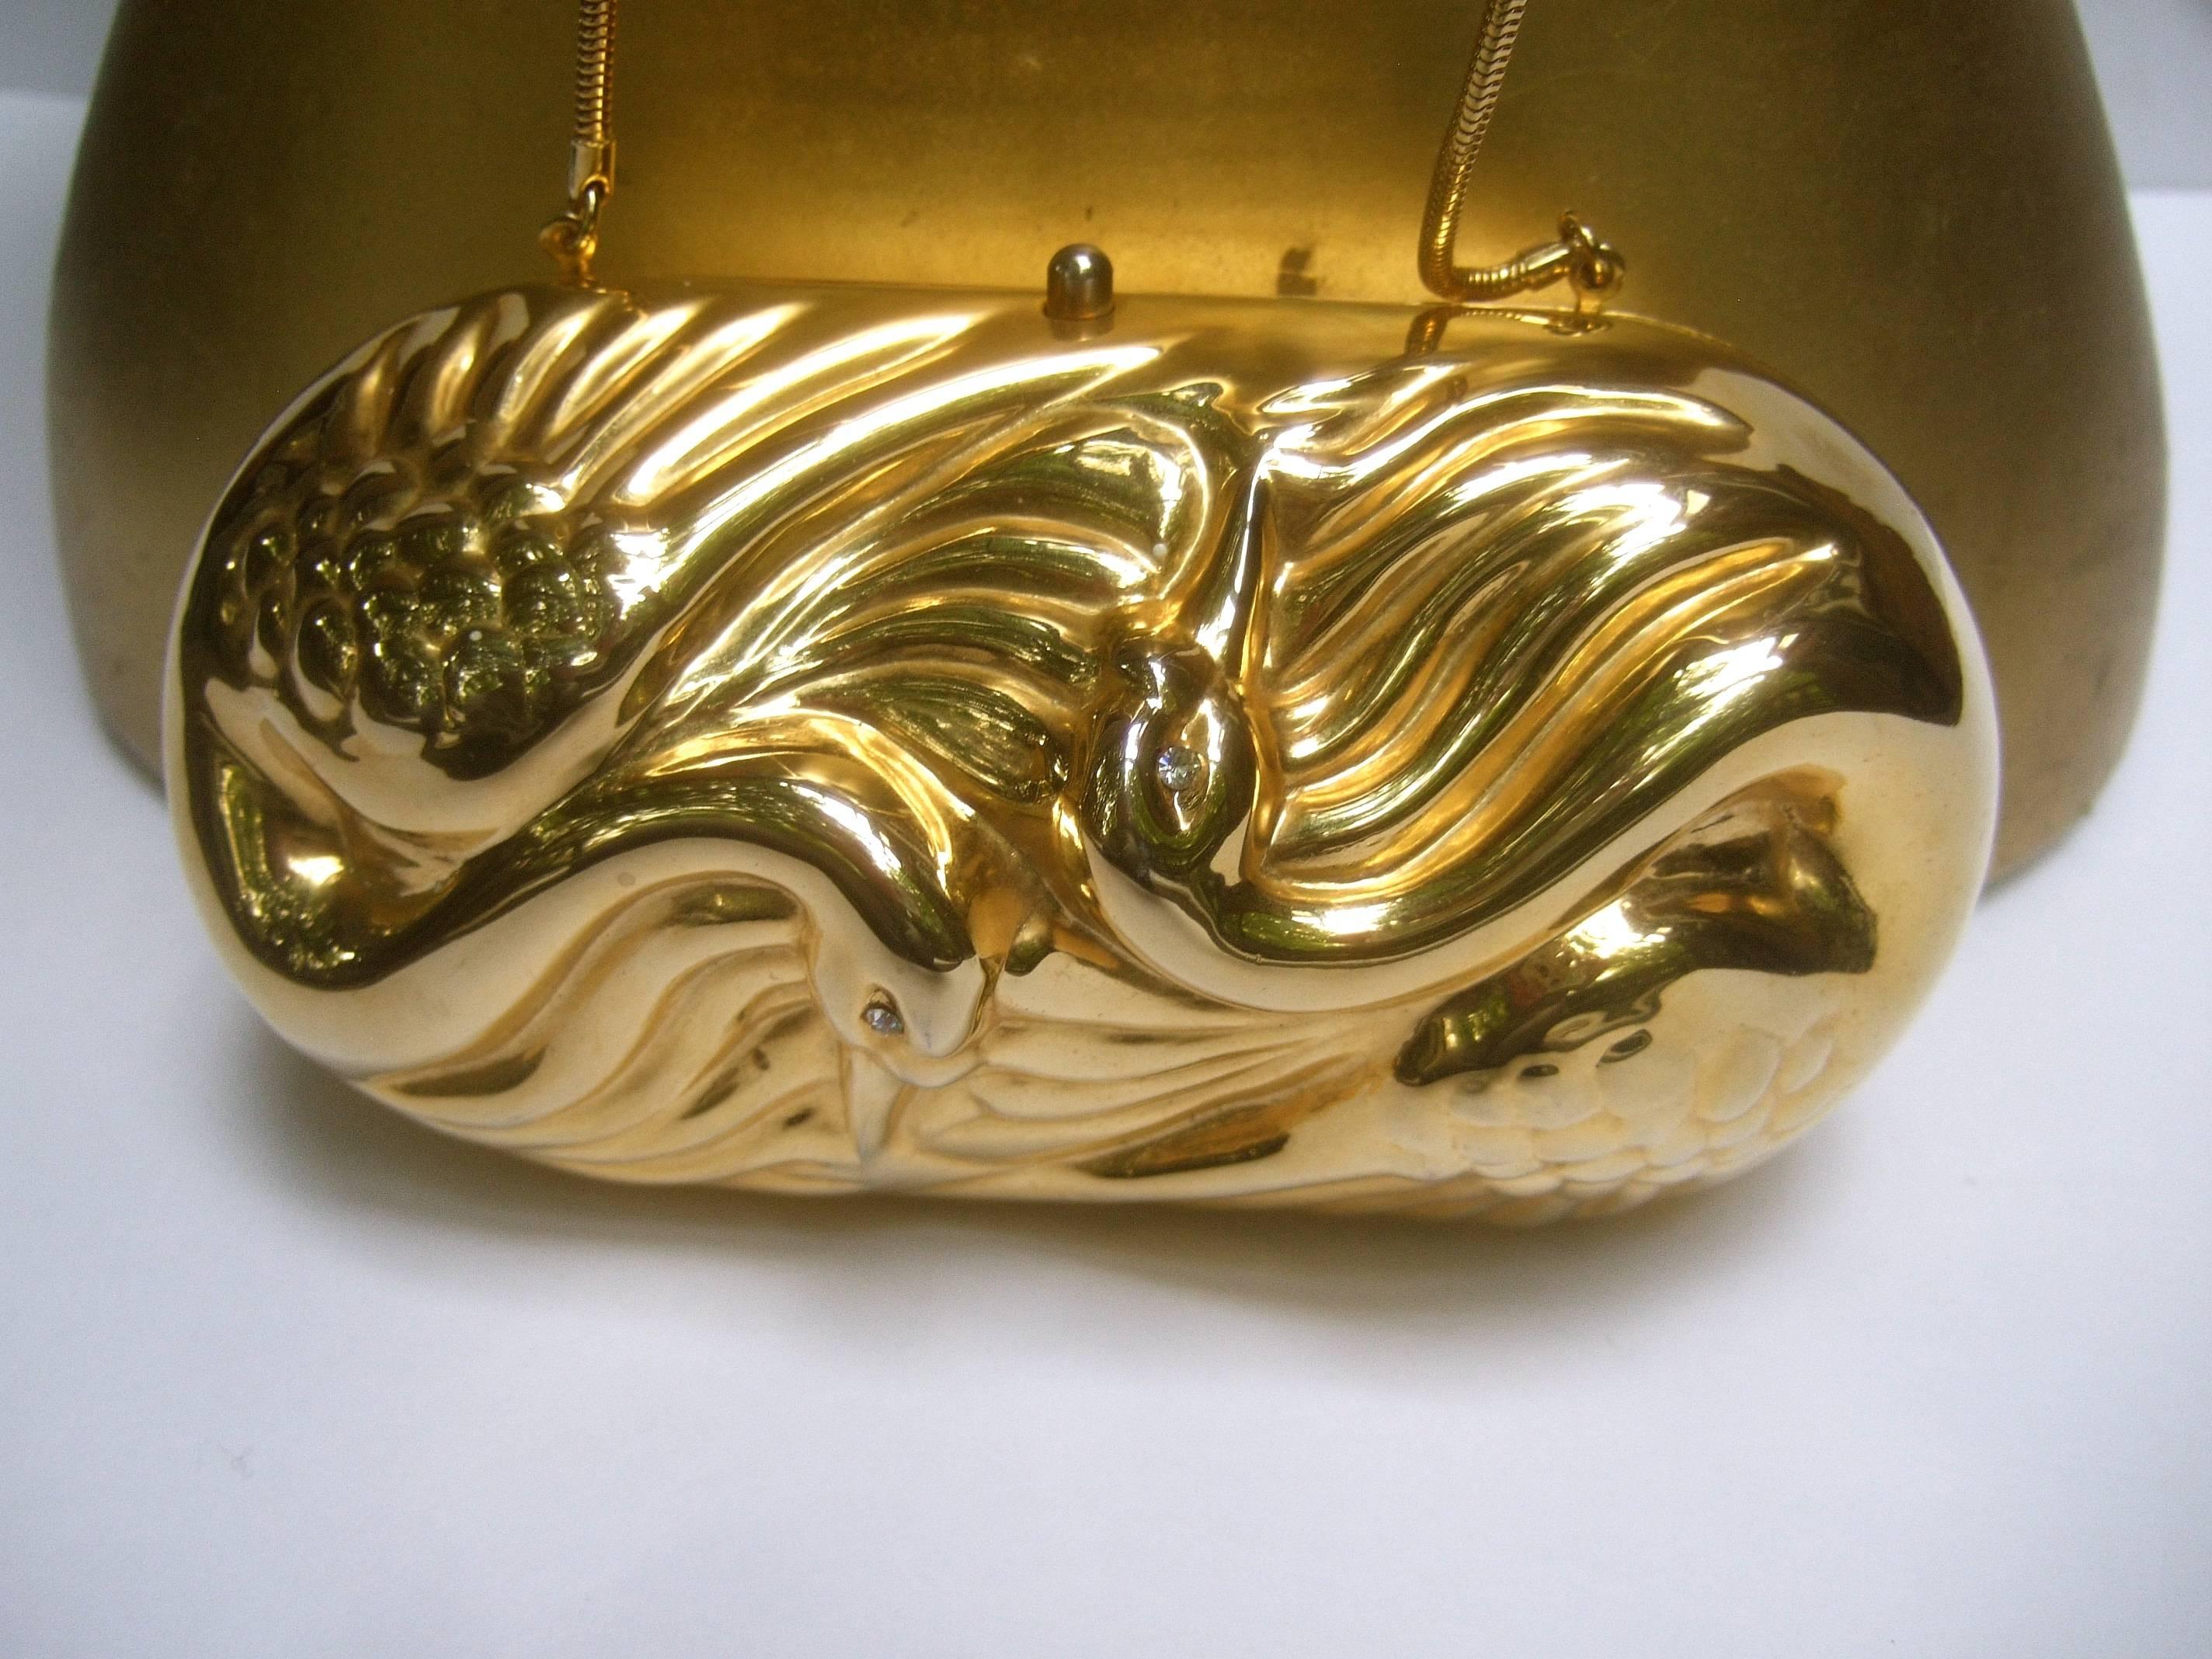 Saks Fifth Avenue Opulent gilt metal Italian evening bag c 1980
The elegant minaudière is designed with a pair of stylized 
repousse swans on the front exterior 

Each of the swans is embellished with a tiny diamante 
crystal eye. The versatile